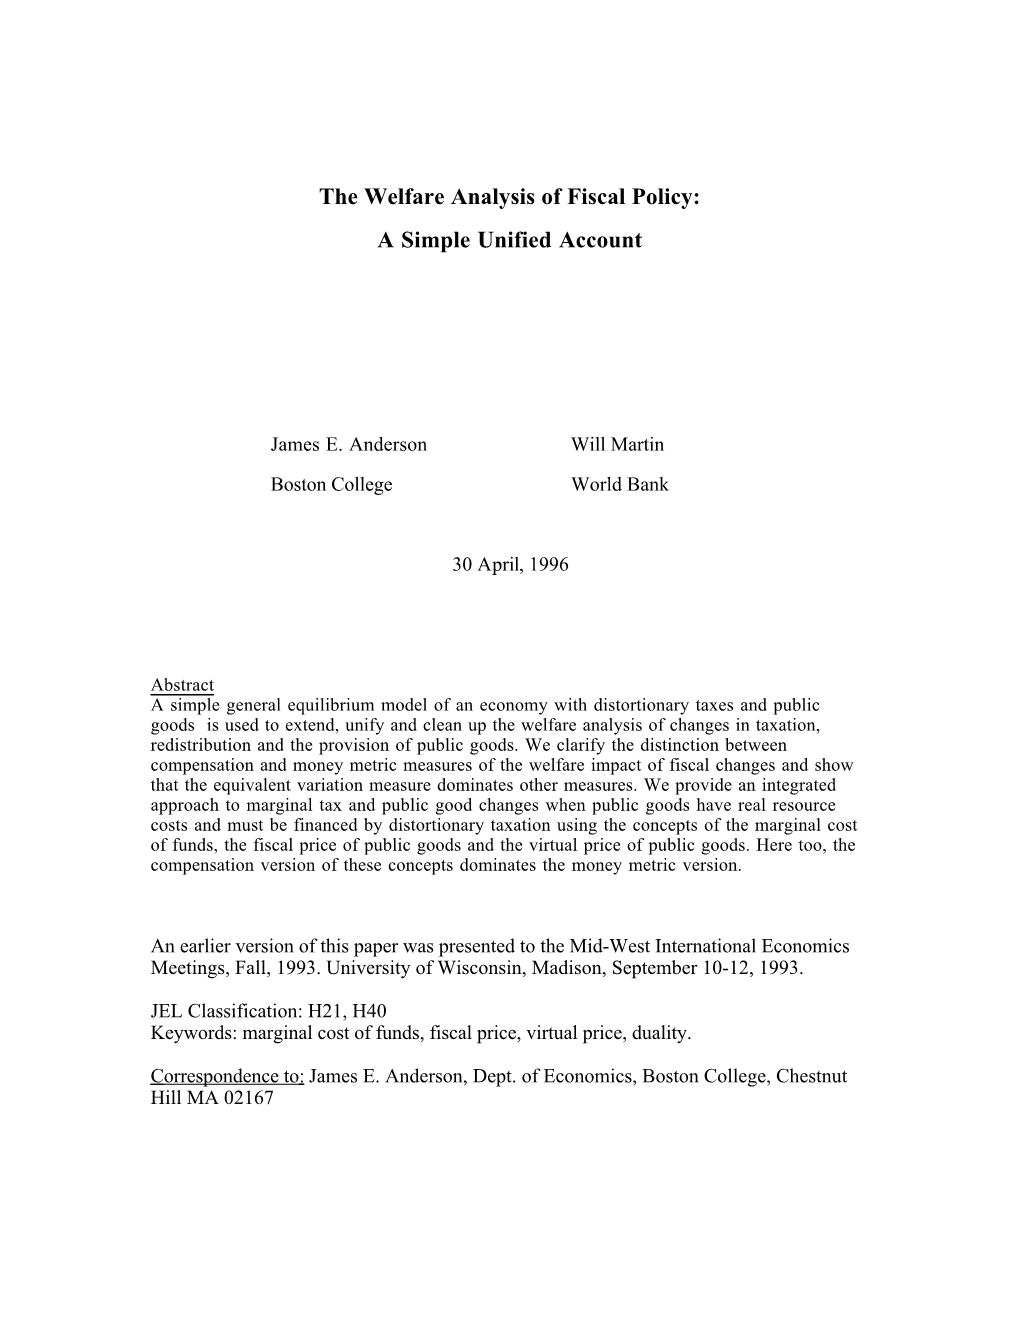 The Welfare Analysis of Fiscal Policy: a Simple Unified Account